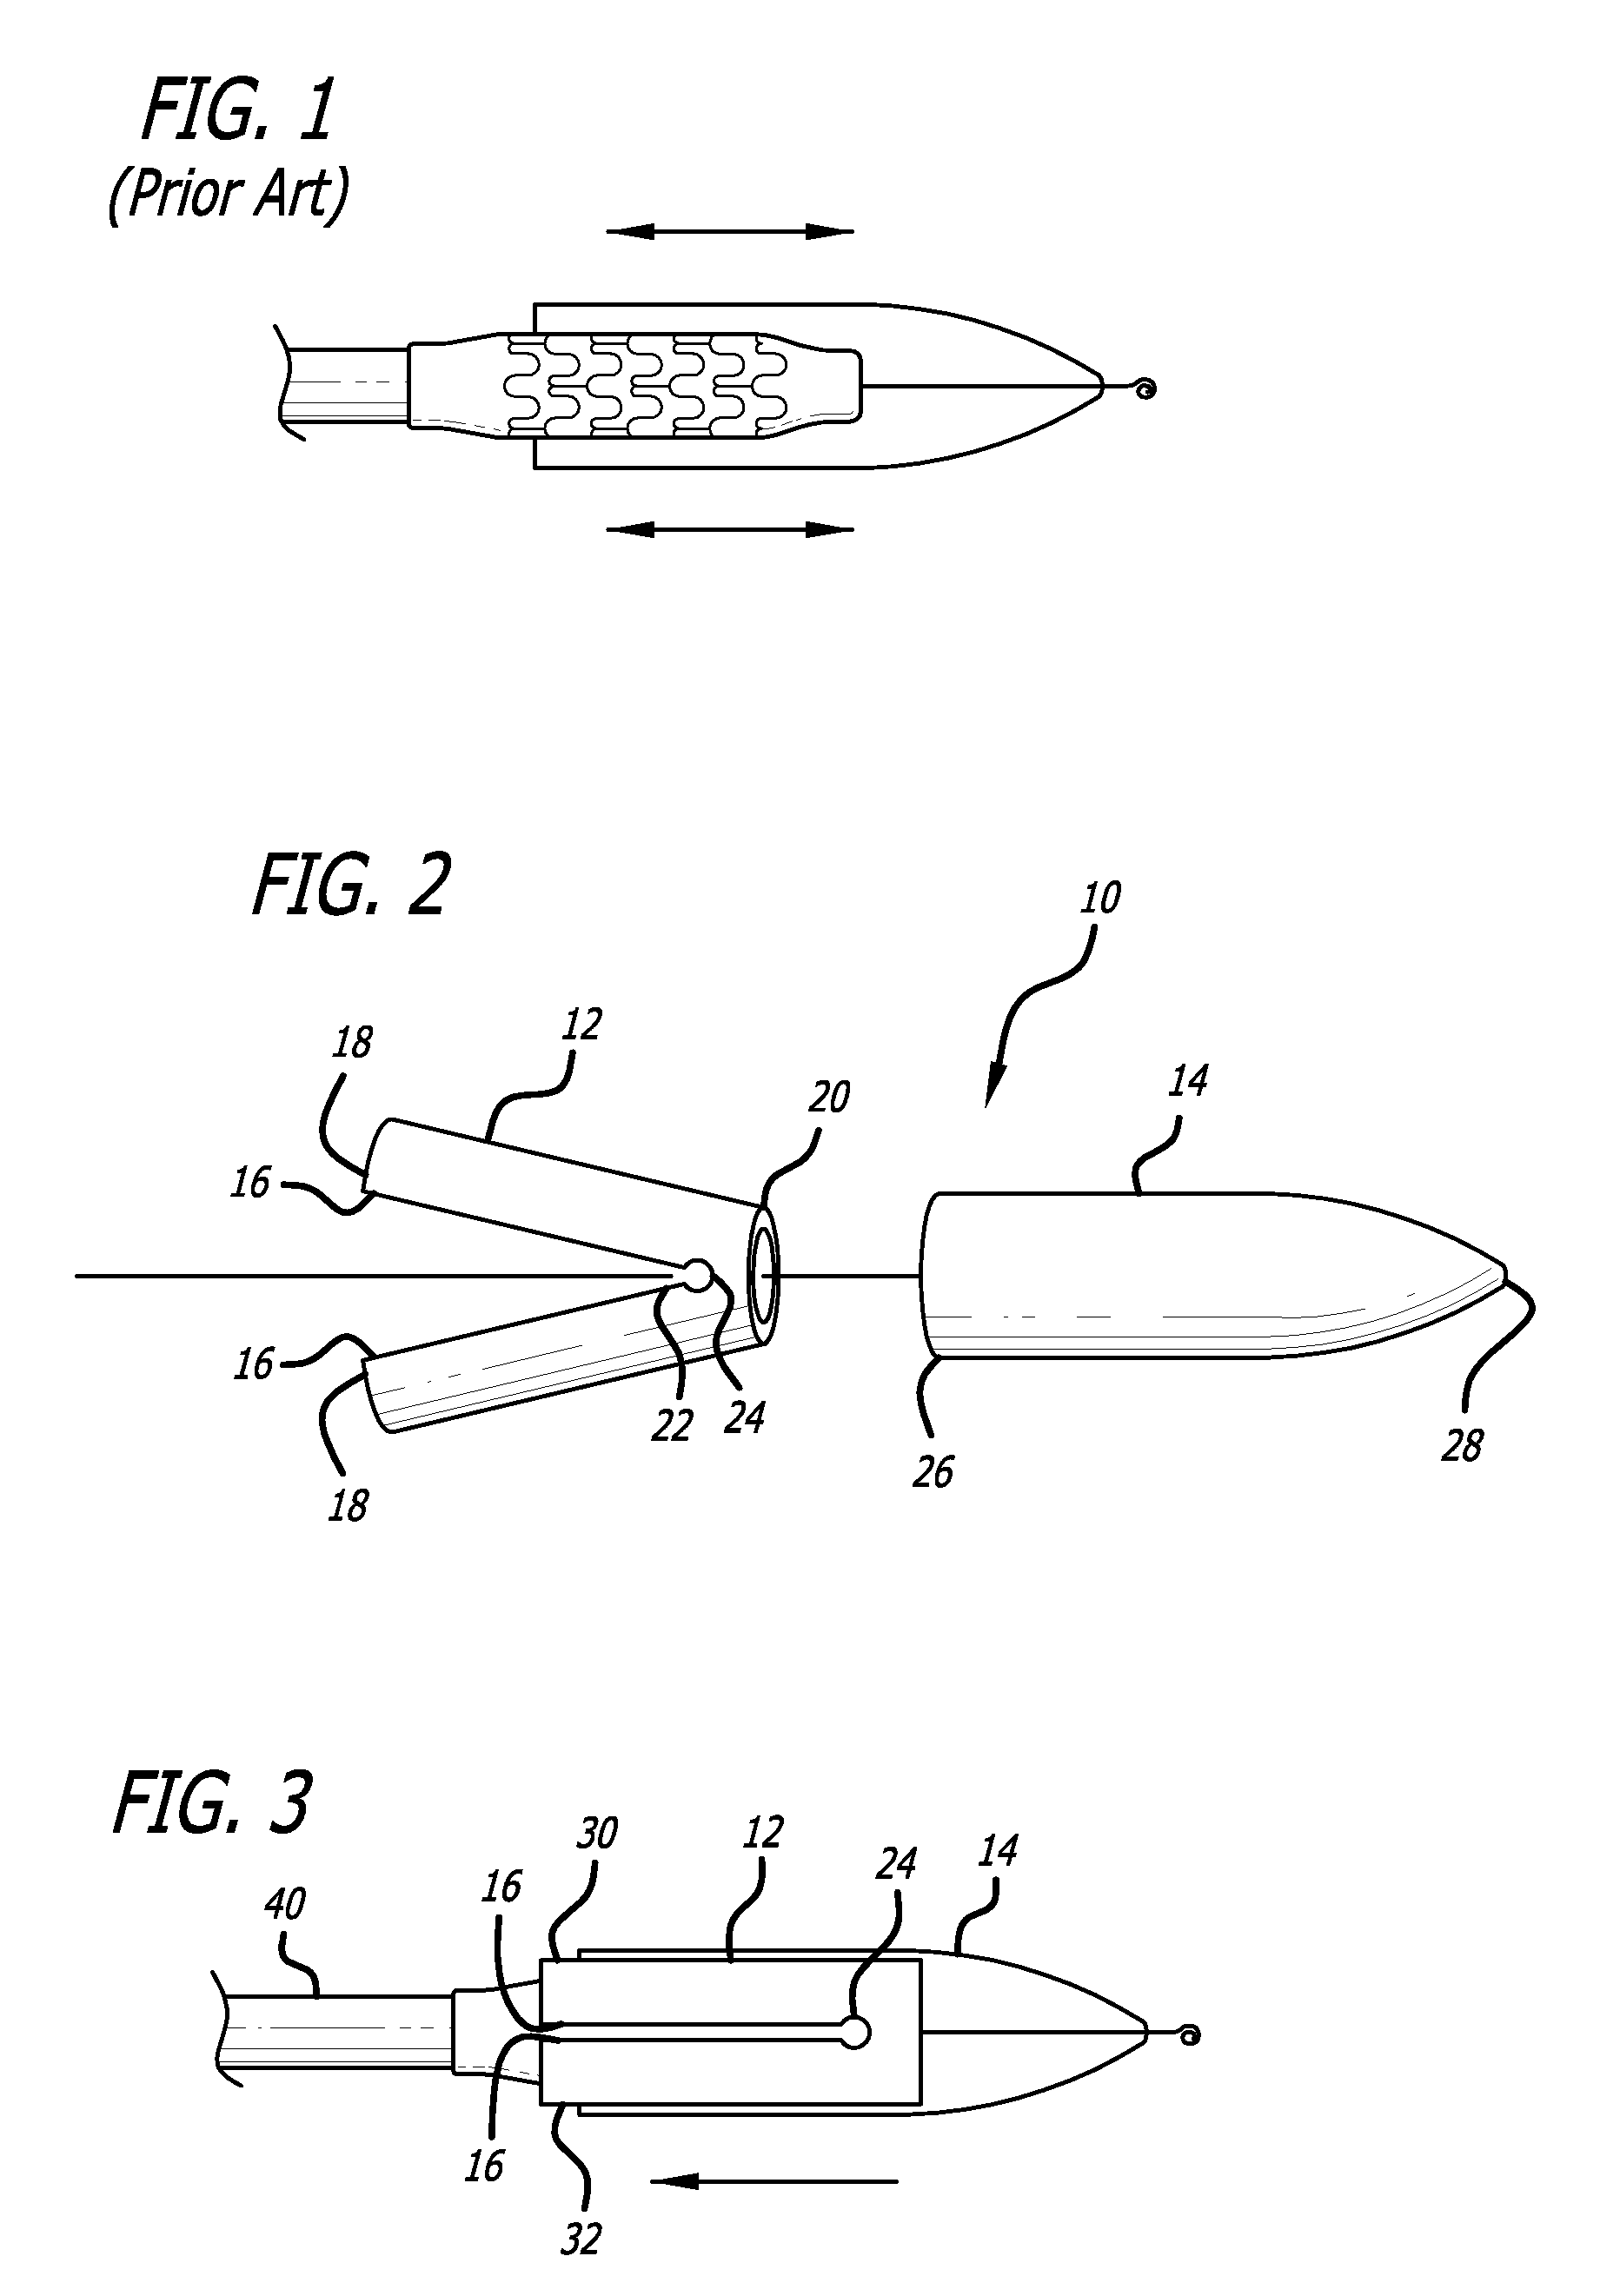 Hinged sheath assembly and method of use